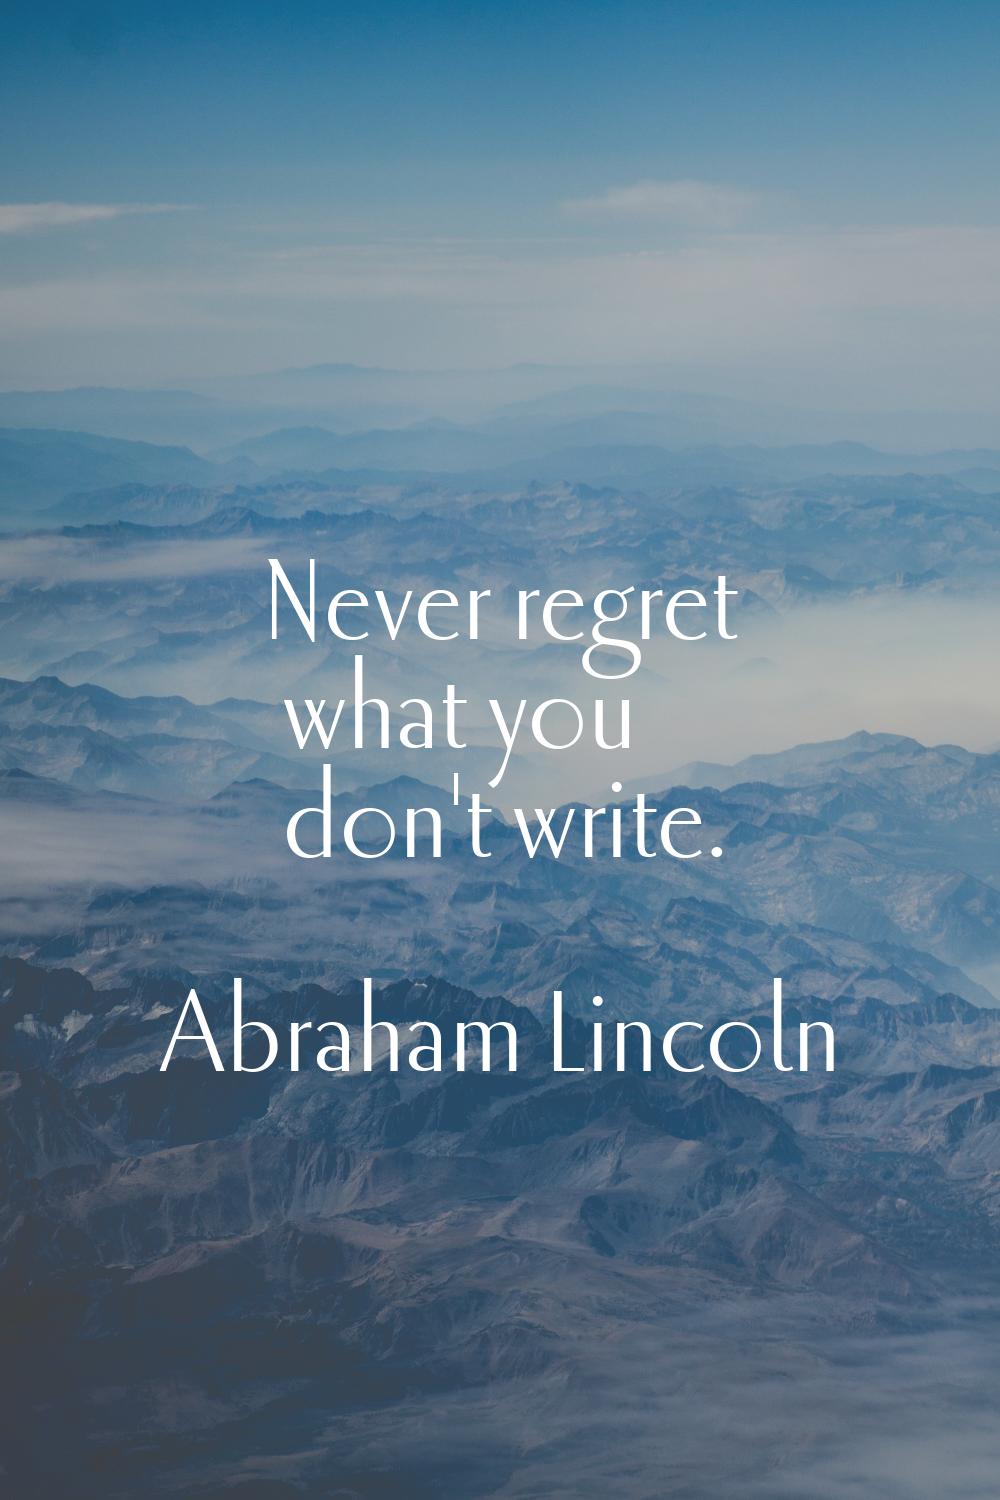 Never regret what you don't write.